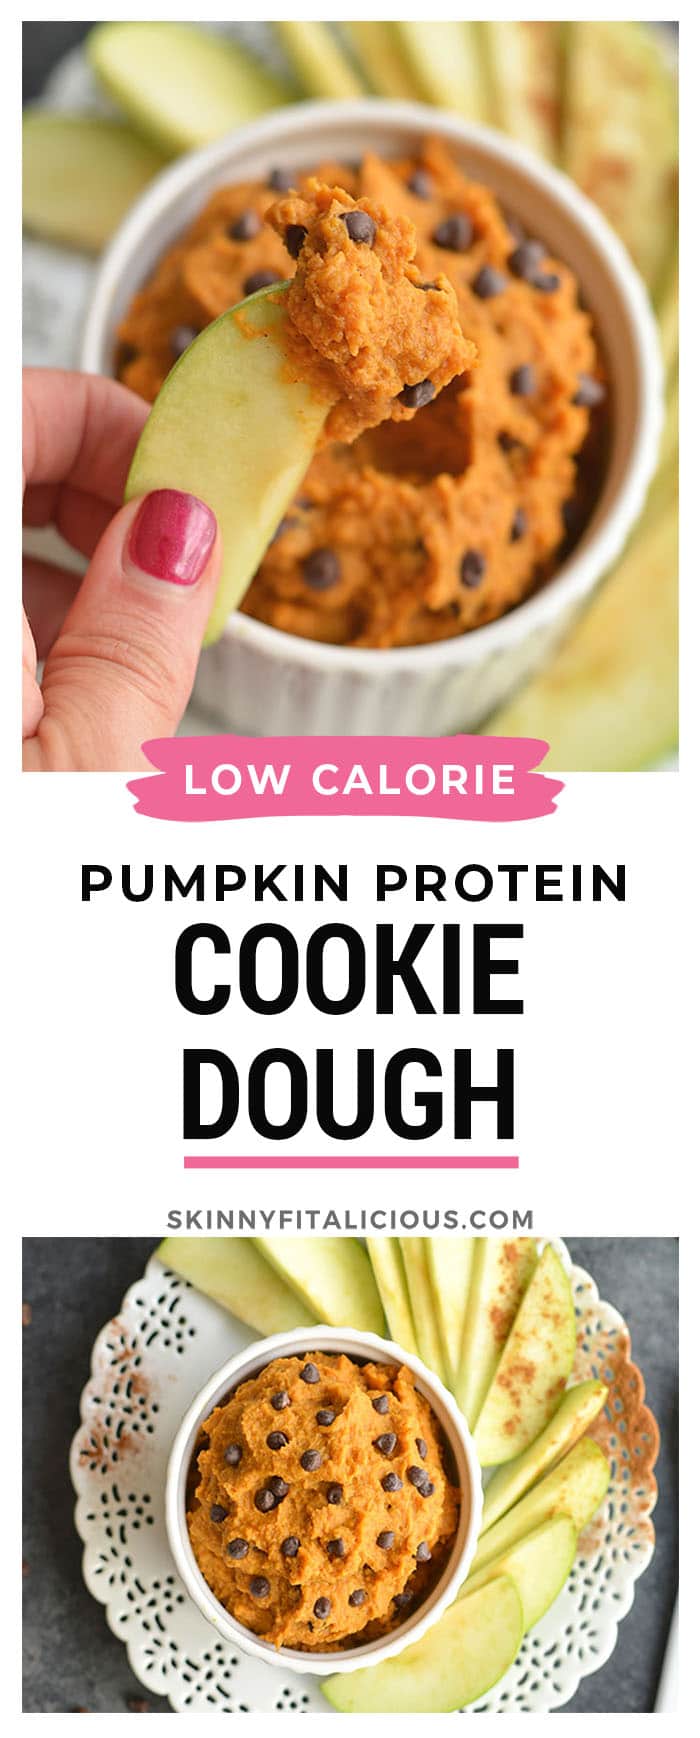 Pumpkin Protein Cookie Dough! A high protein dip for dipping fruit in or eating by the spoonful. EASY to make and tastes like cookie dough. Gluten Free + Vegan + Low Calorie + Paleo.